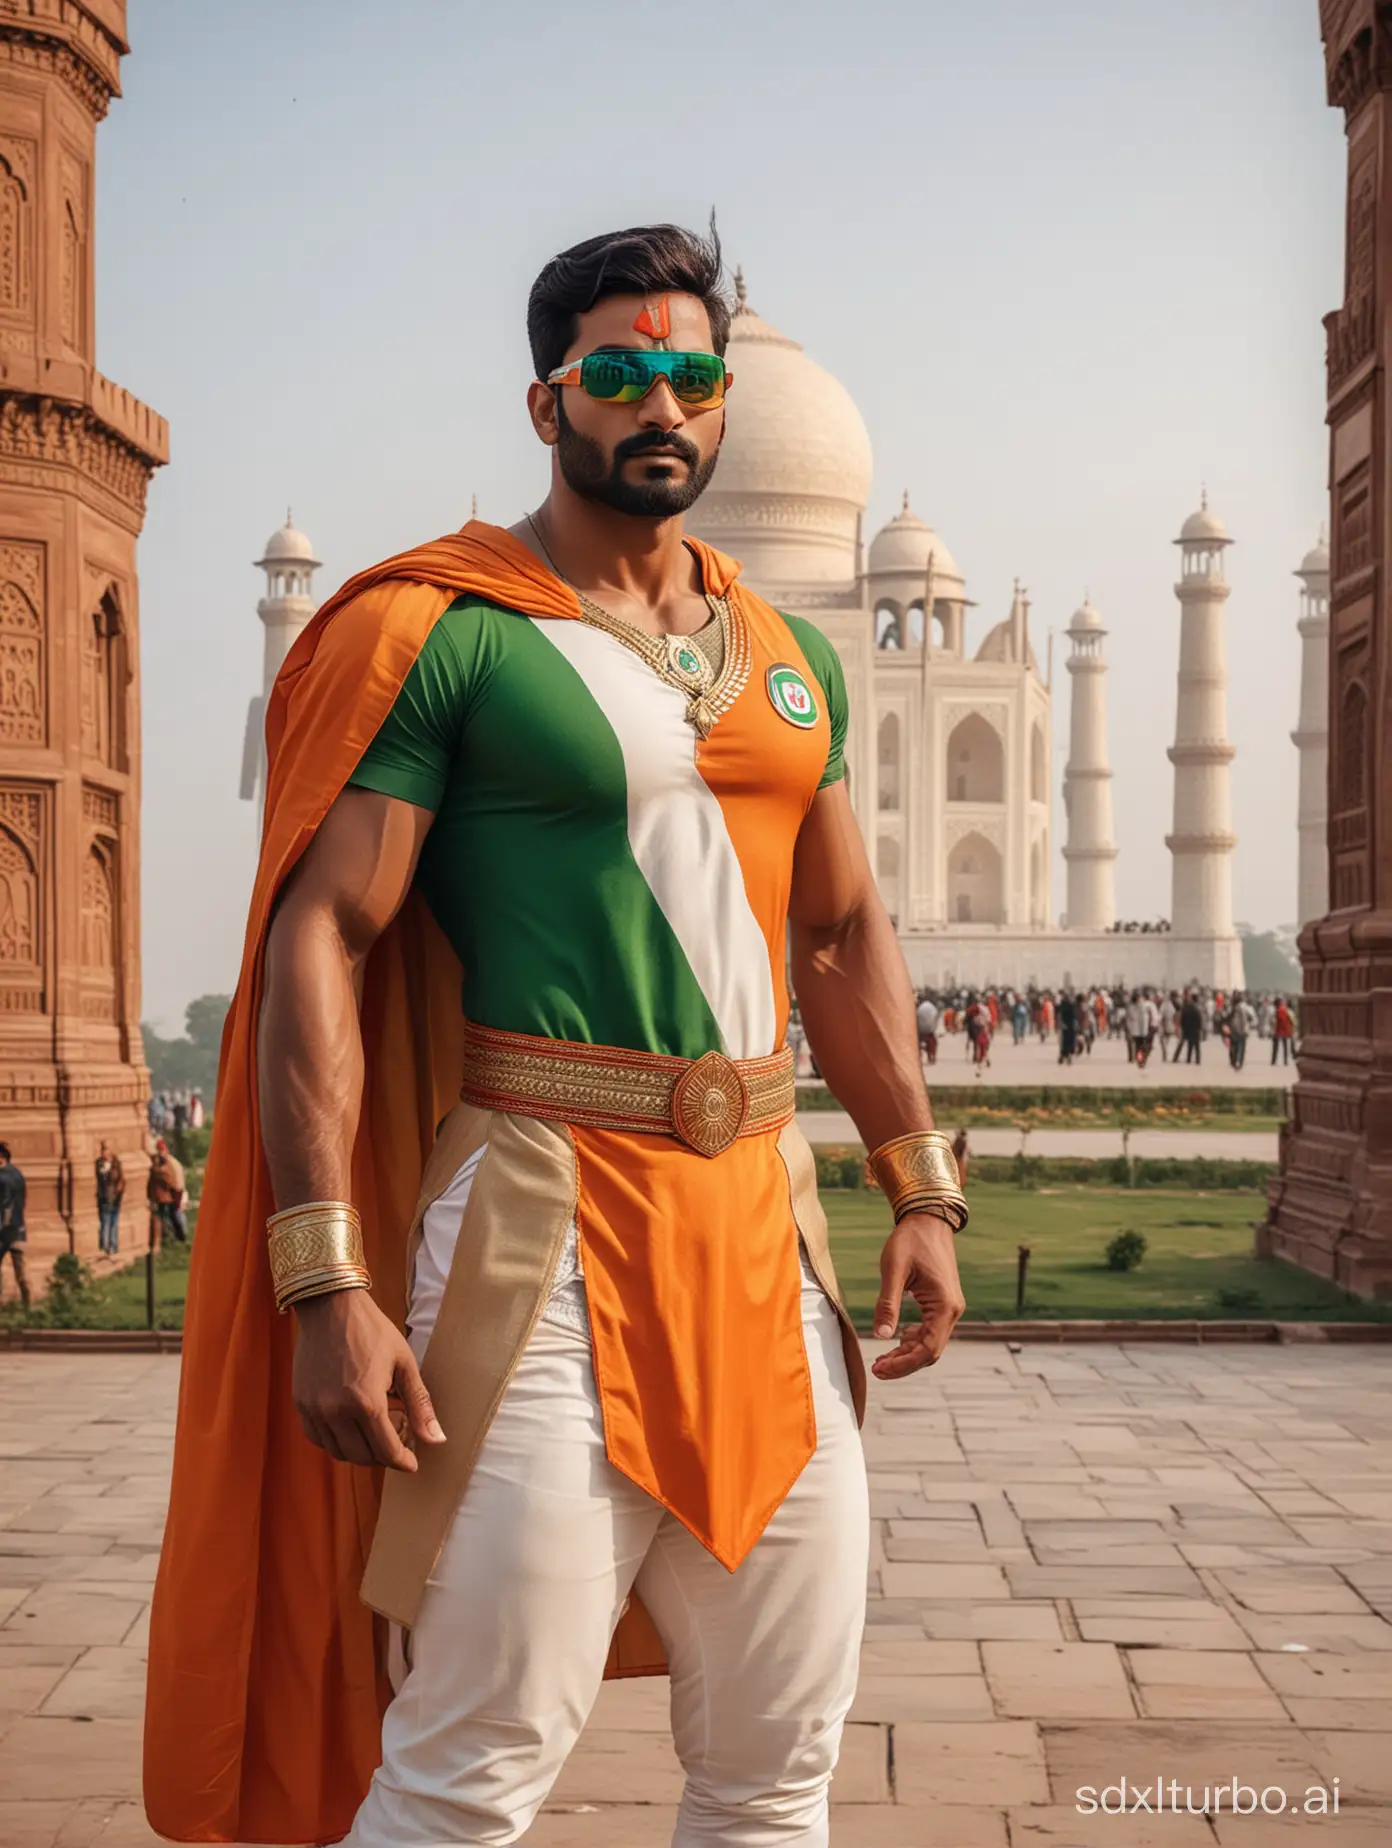 Indian-Superhero-Standing-Proudly-at-the-Taj-Mahal-with-Flaginspired-Costume-and-Muscular-Build